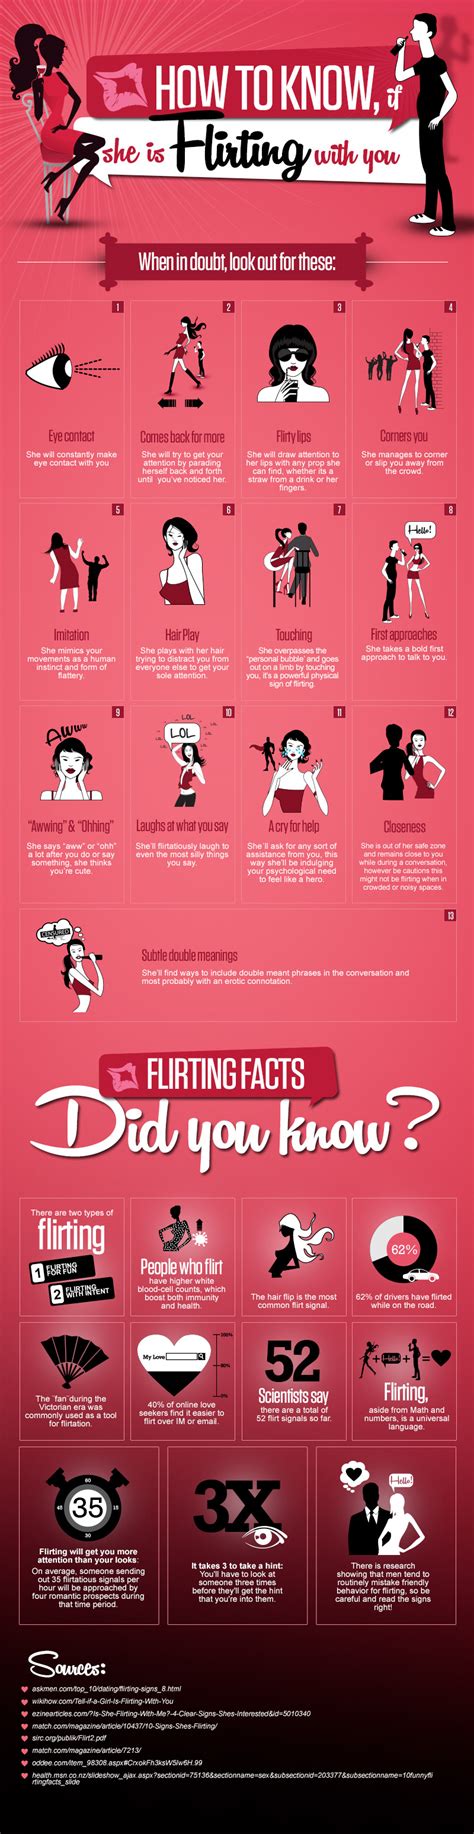 What are flirting signs?